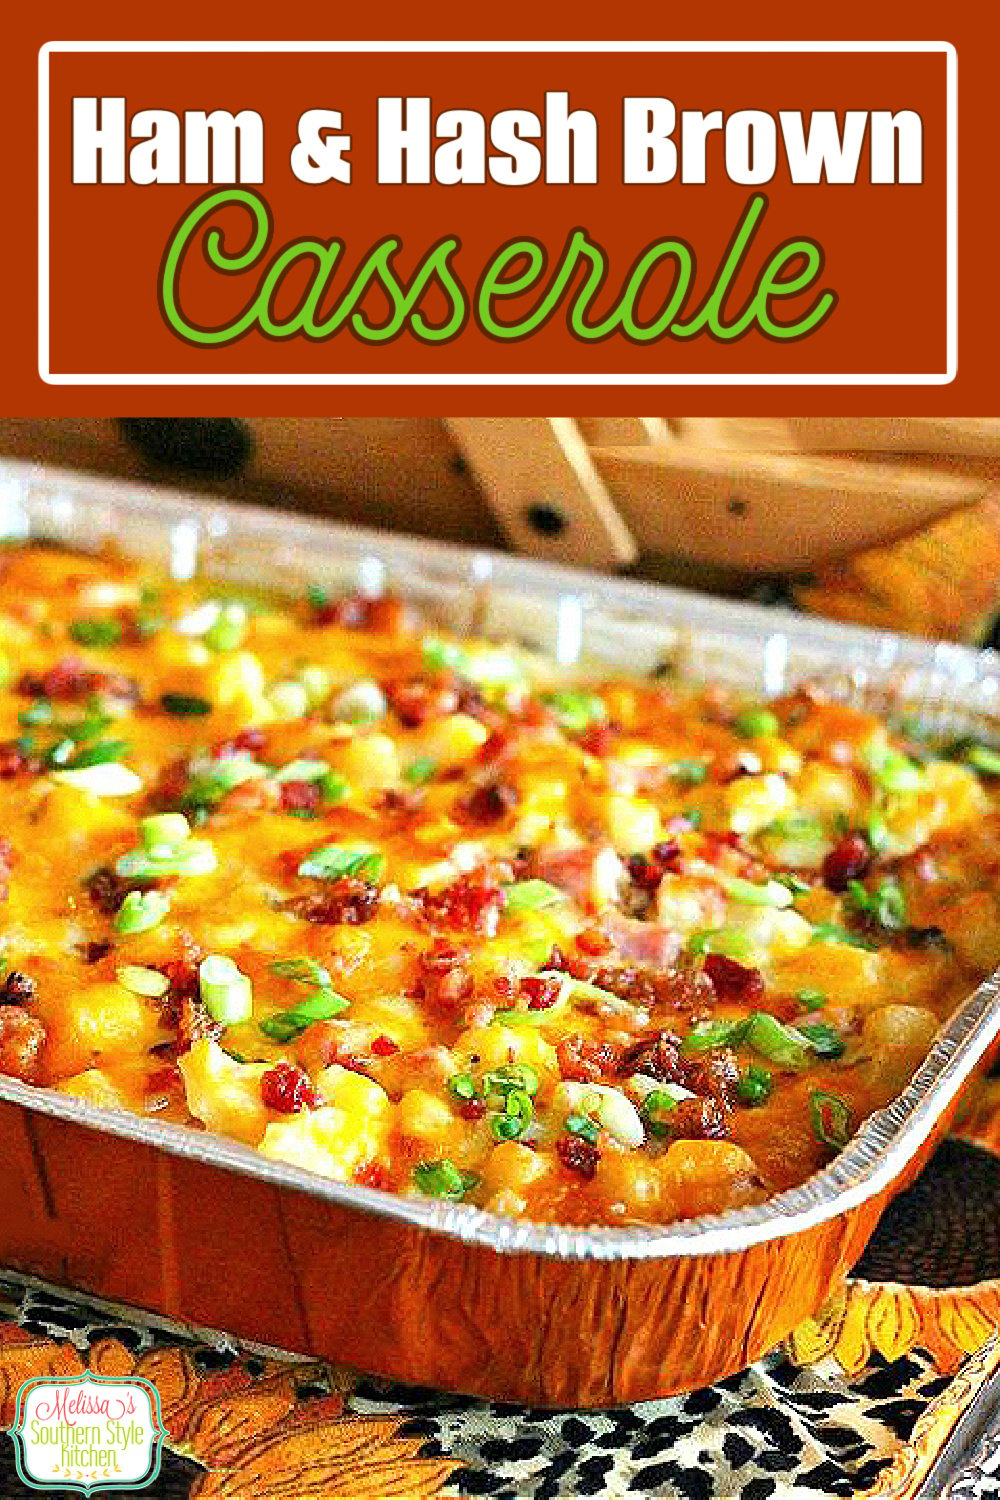 Turn leftover ham into a round two meal with this Ham and Hash Brown Casserole #ham #hamandhashbrowns #hashbrowncasserole #potatoes #potatocasserole #hashbrowns #holidayham #casserolerecipes #casseroles #southernfood #holidayrecipes #holidaybrunchrecipes #southernrecipes #bestpotatocasseroles via @melissasssk